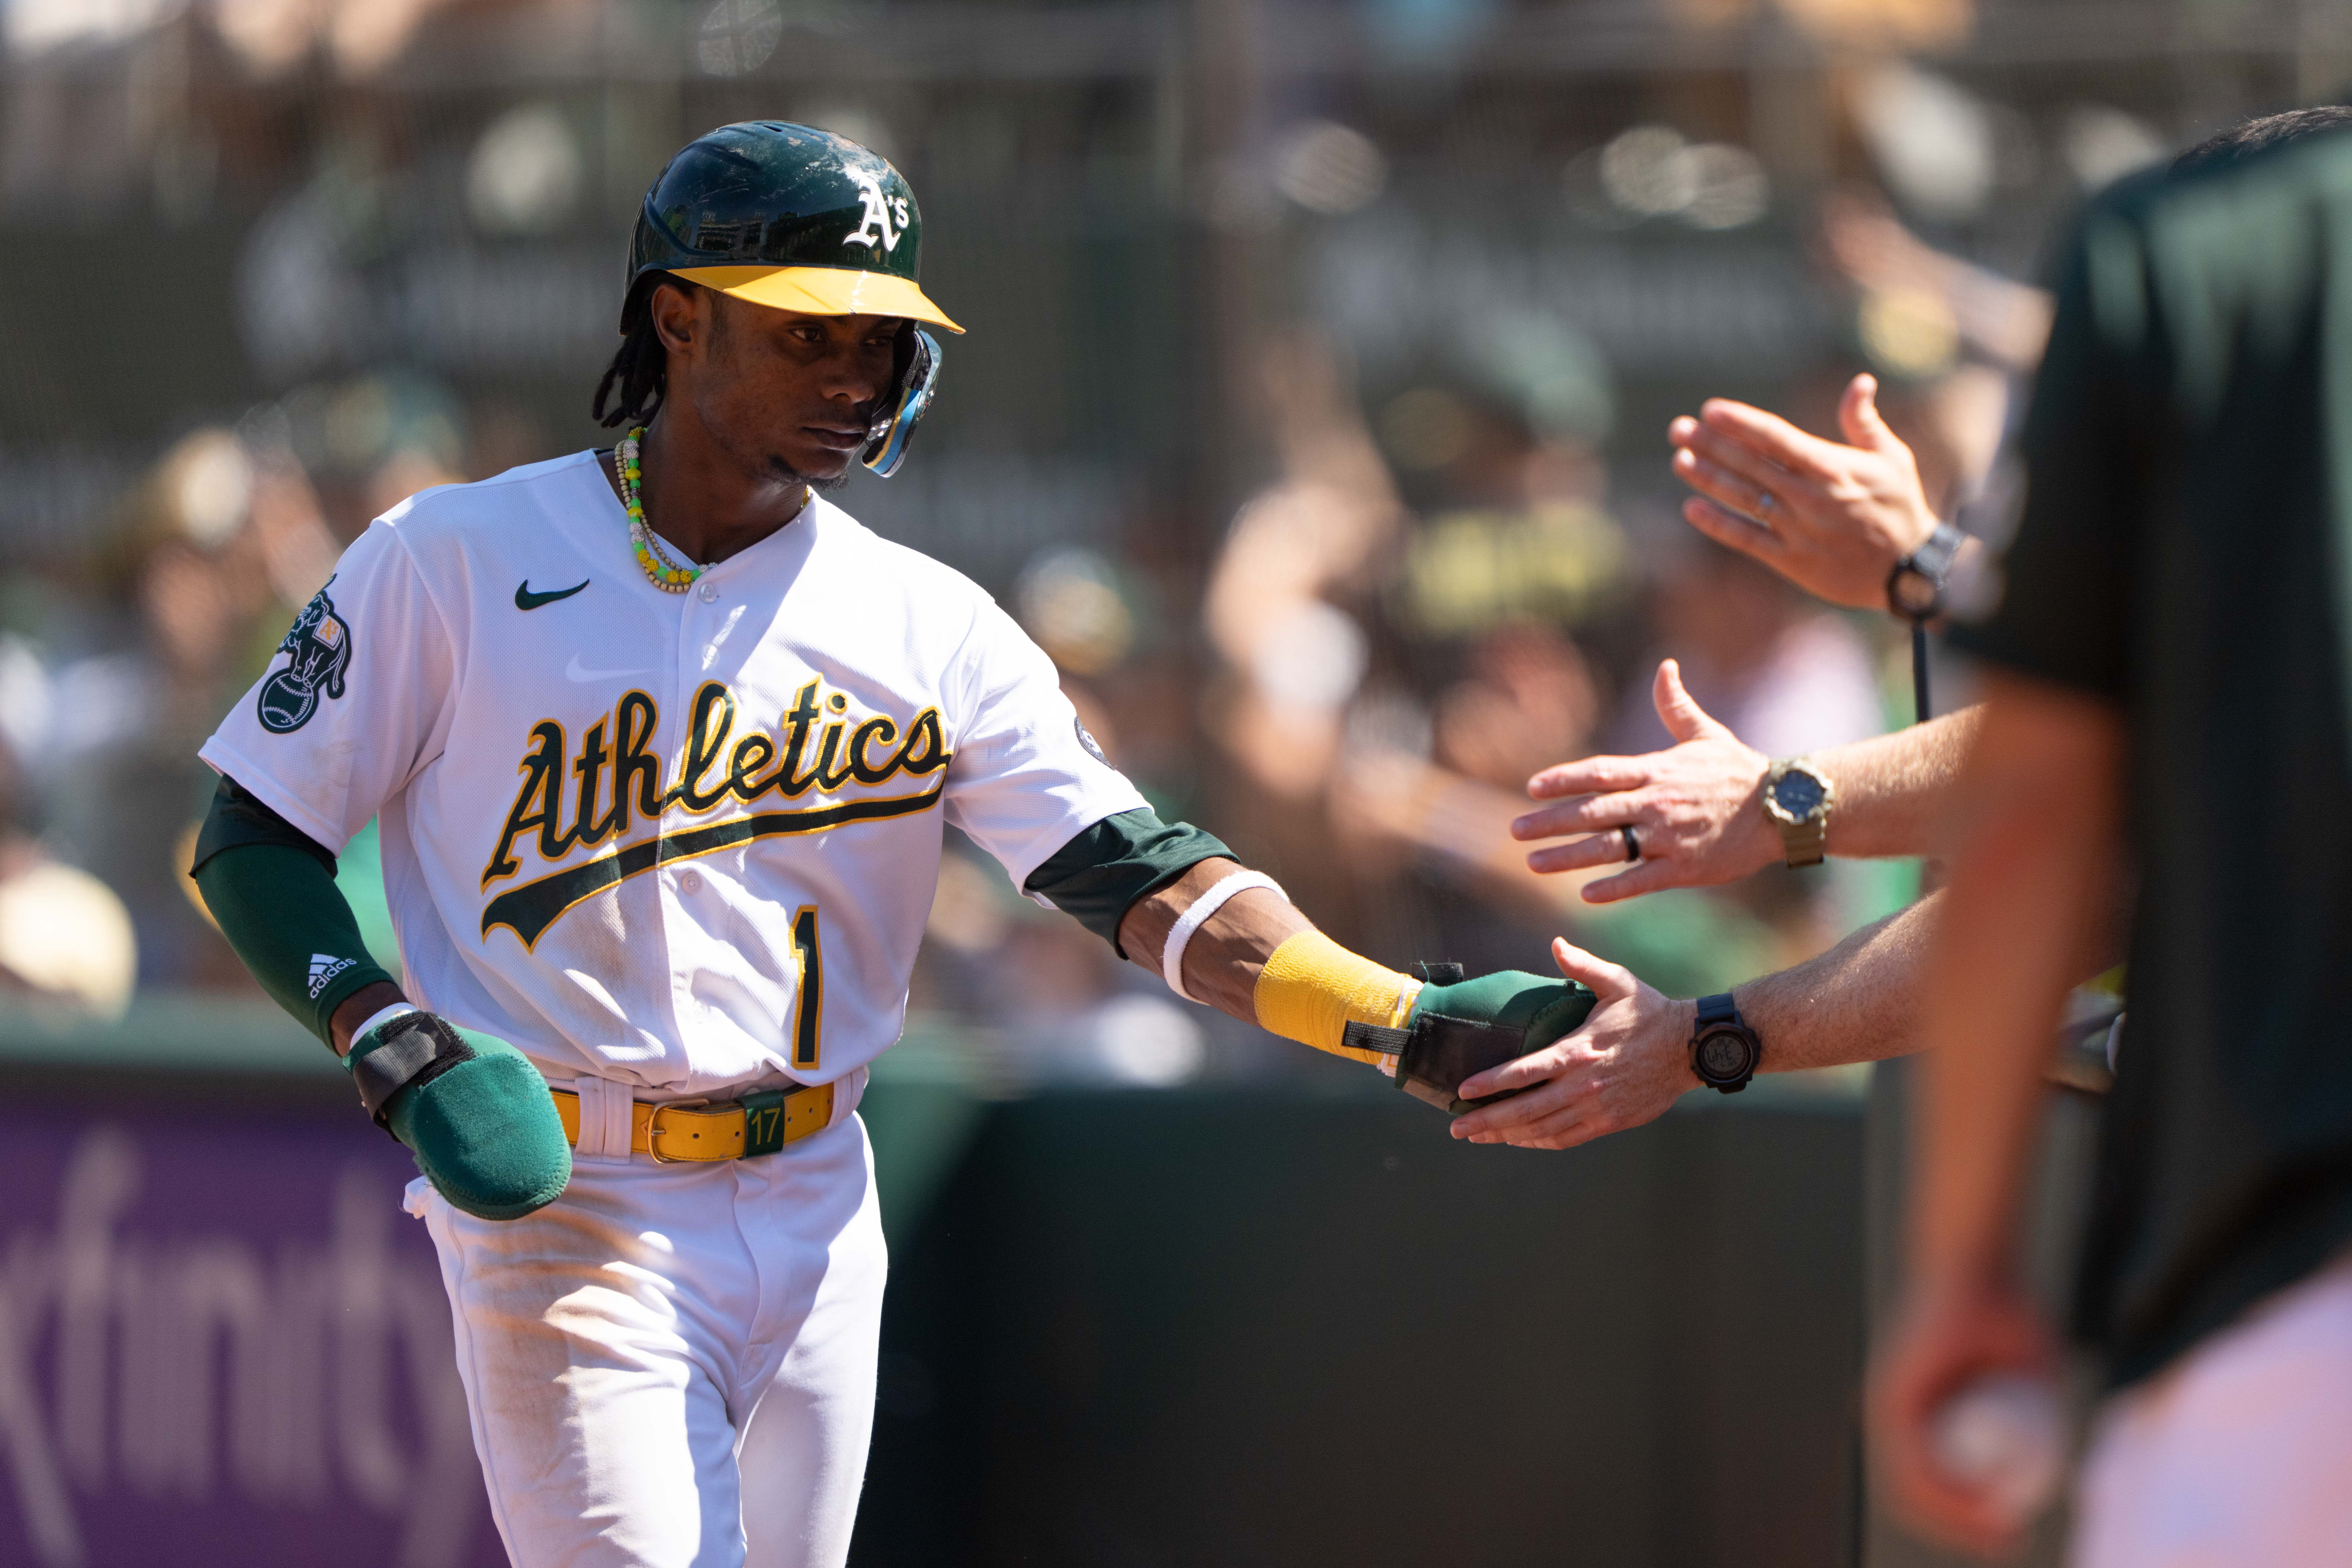 Andrus' 10th-inning error gives A's 7-6 win over White Sox - CBS Chicago